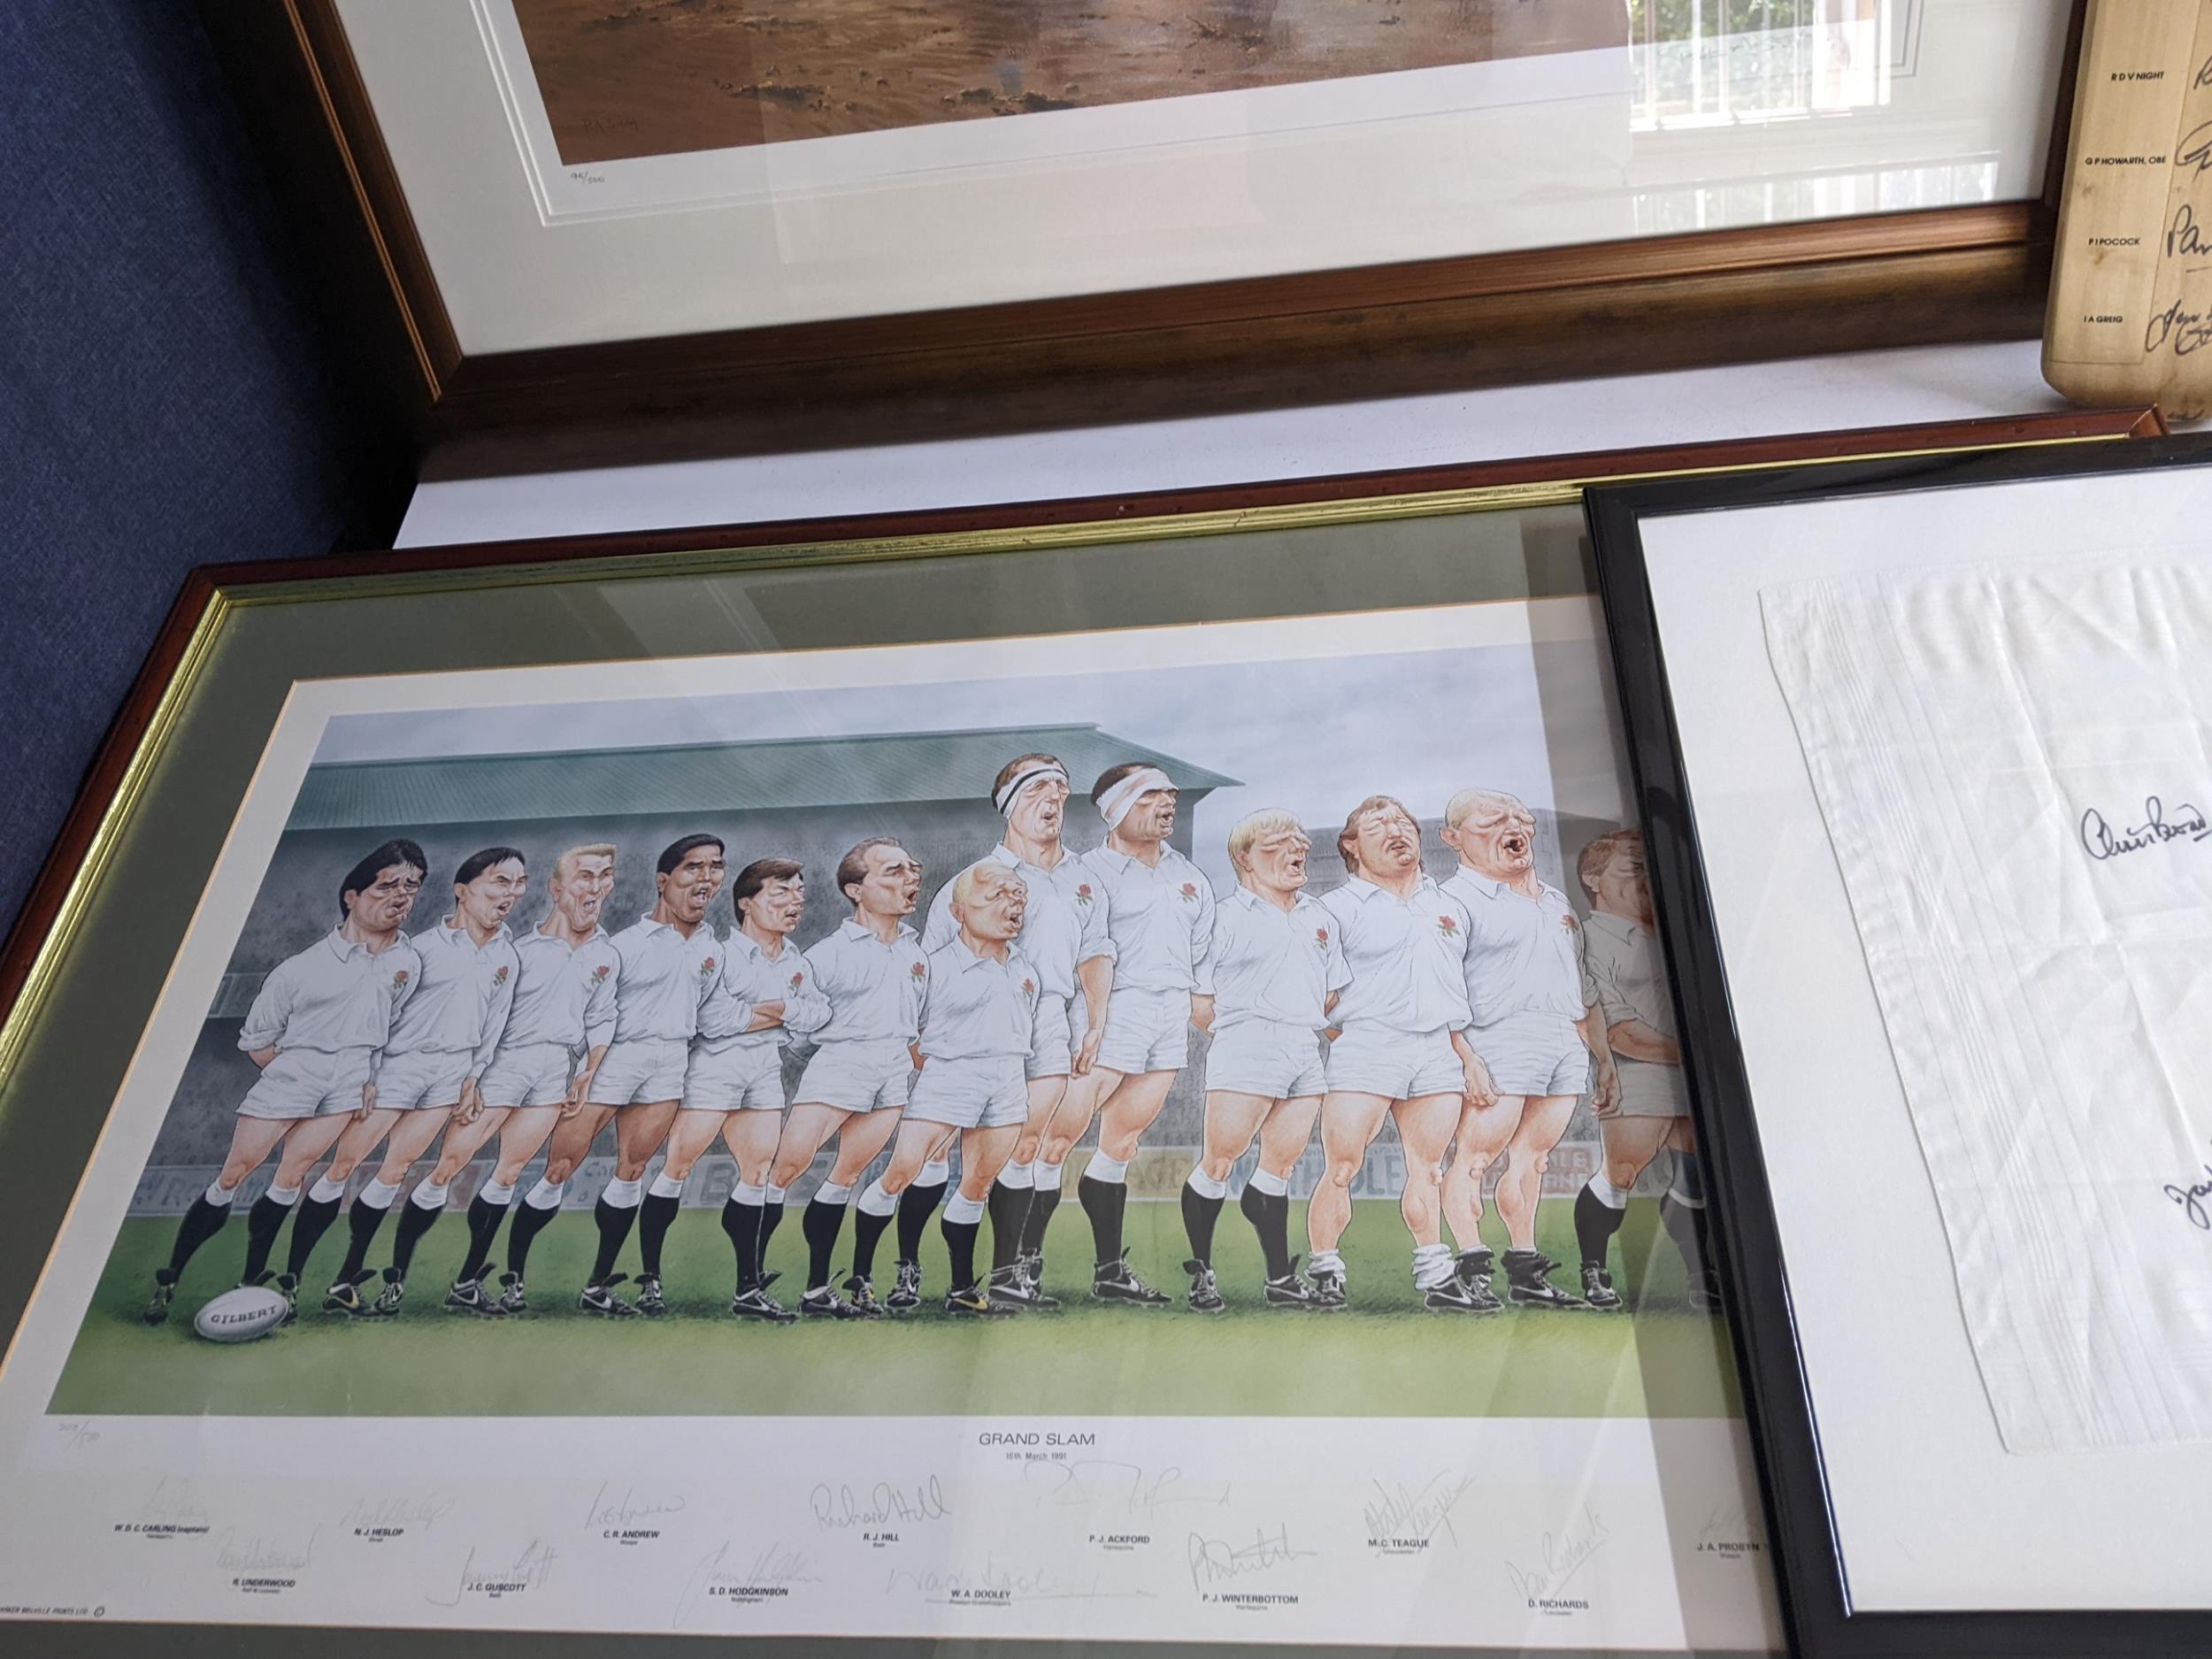 Sporting related framed pictures to include 'moment of victory' by Jack Russell framed images of - Image 2 of 6